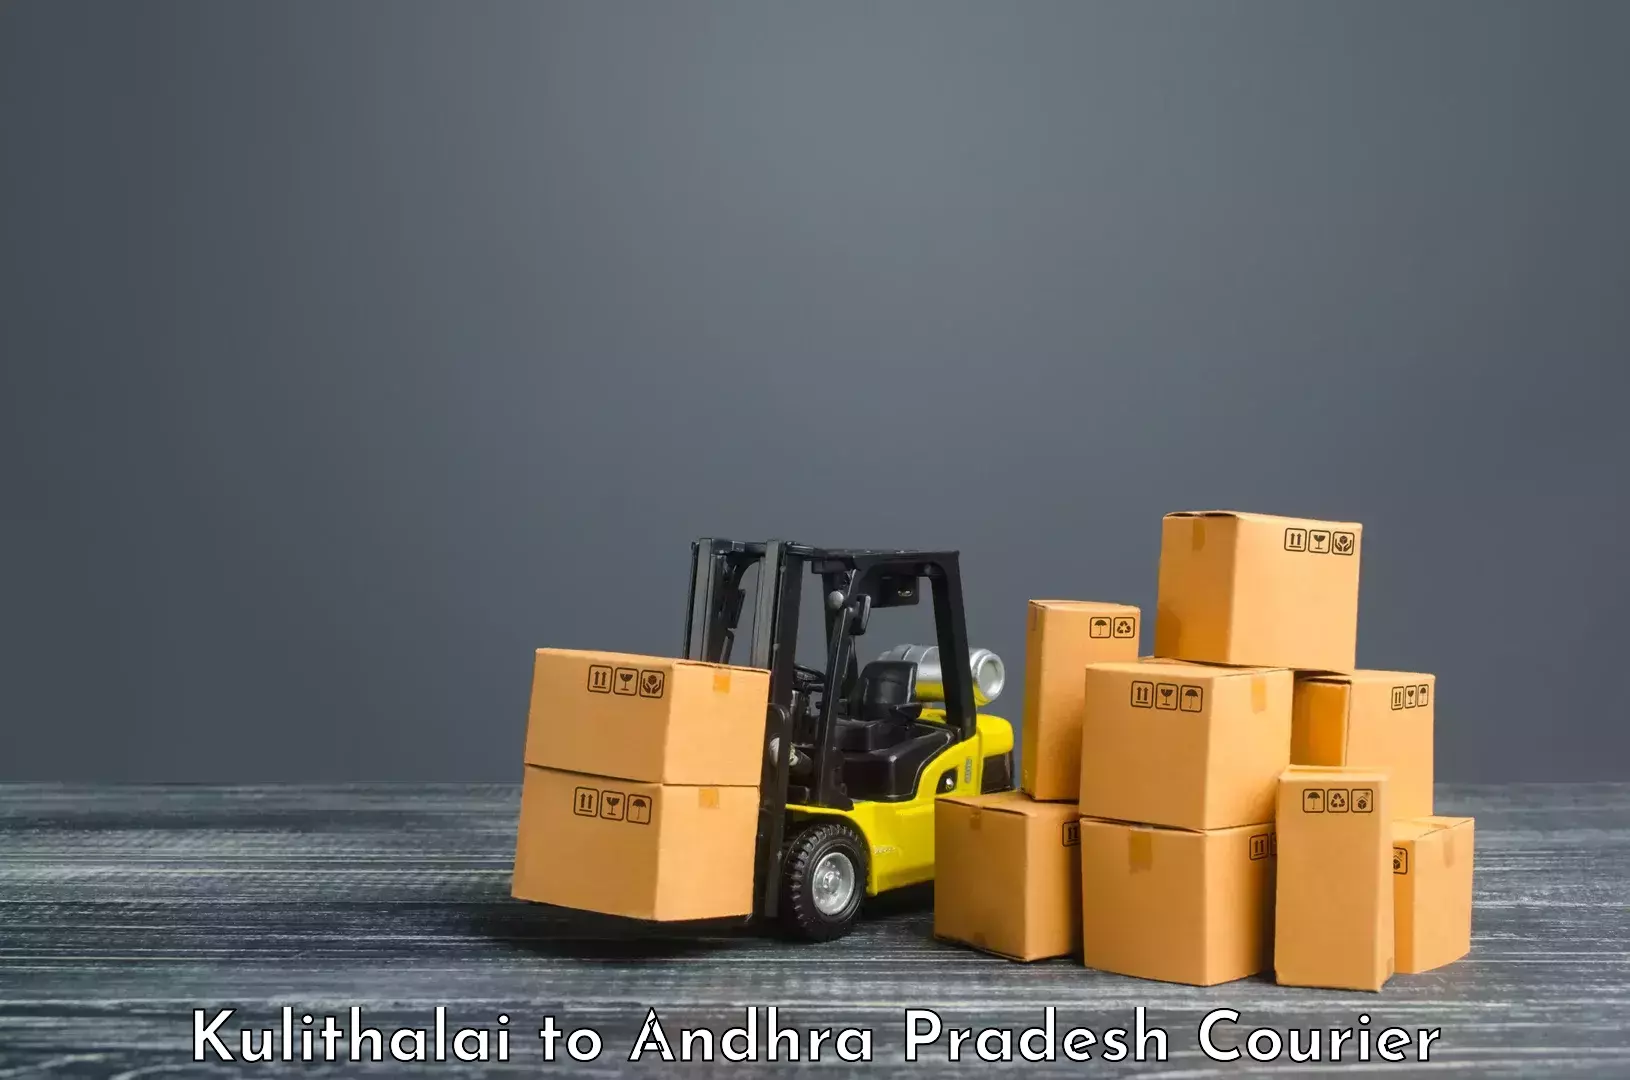 Specialized shipment handling in Kulithalai to Kuppam